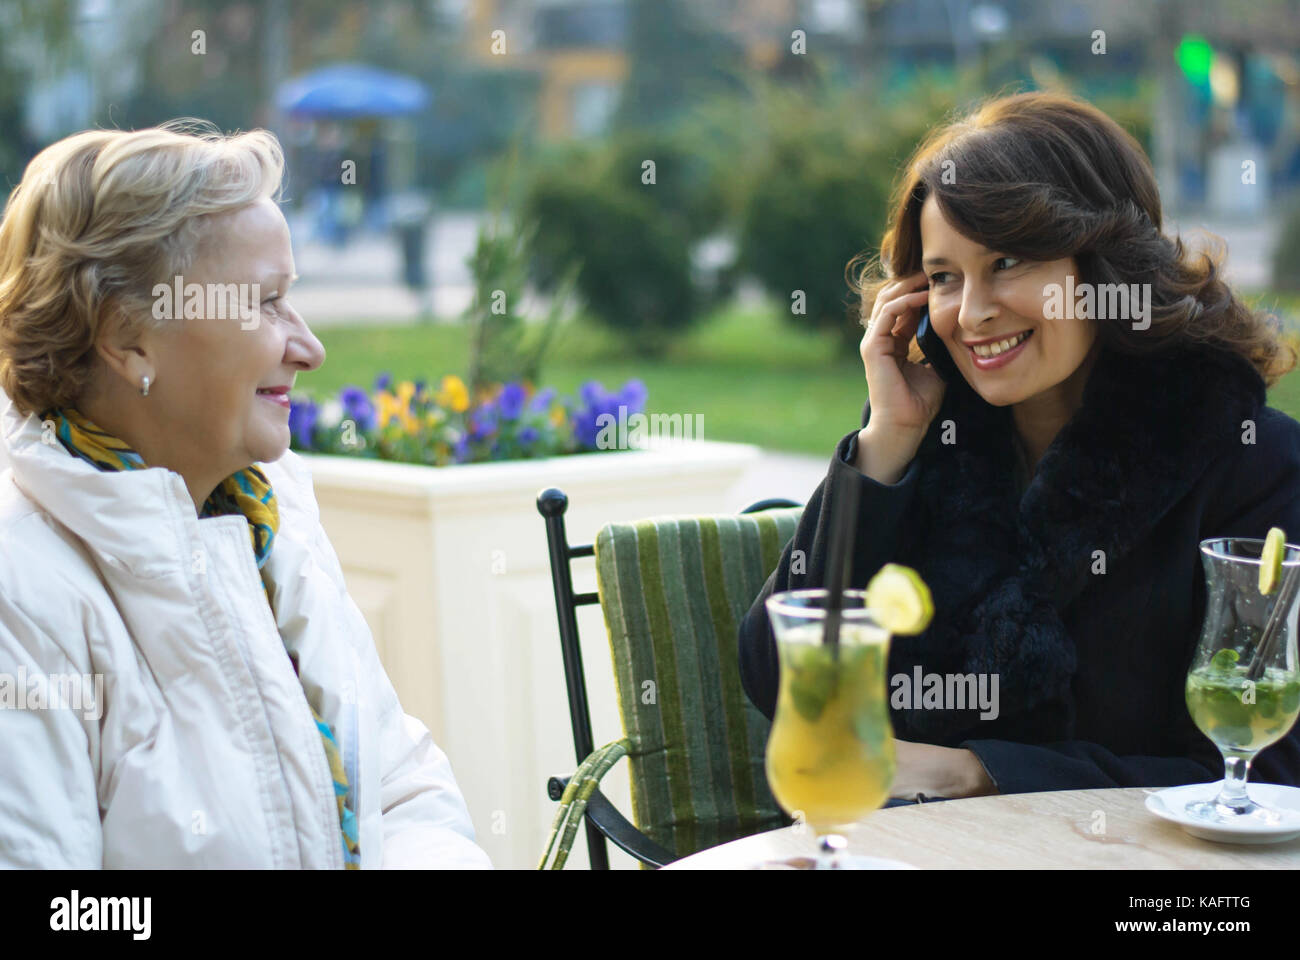 Two middle-aged women hang out in the cafe, after a sunny autumn day Stock Photo